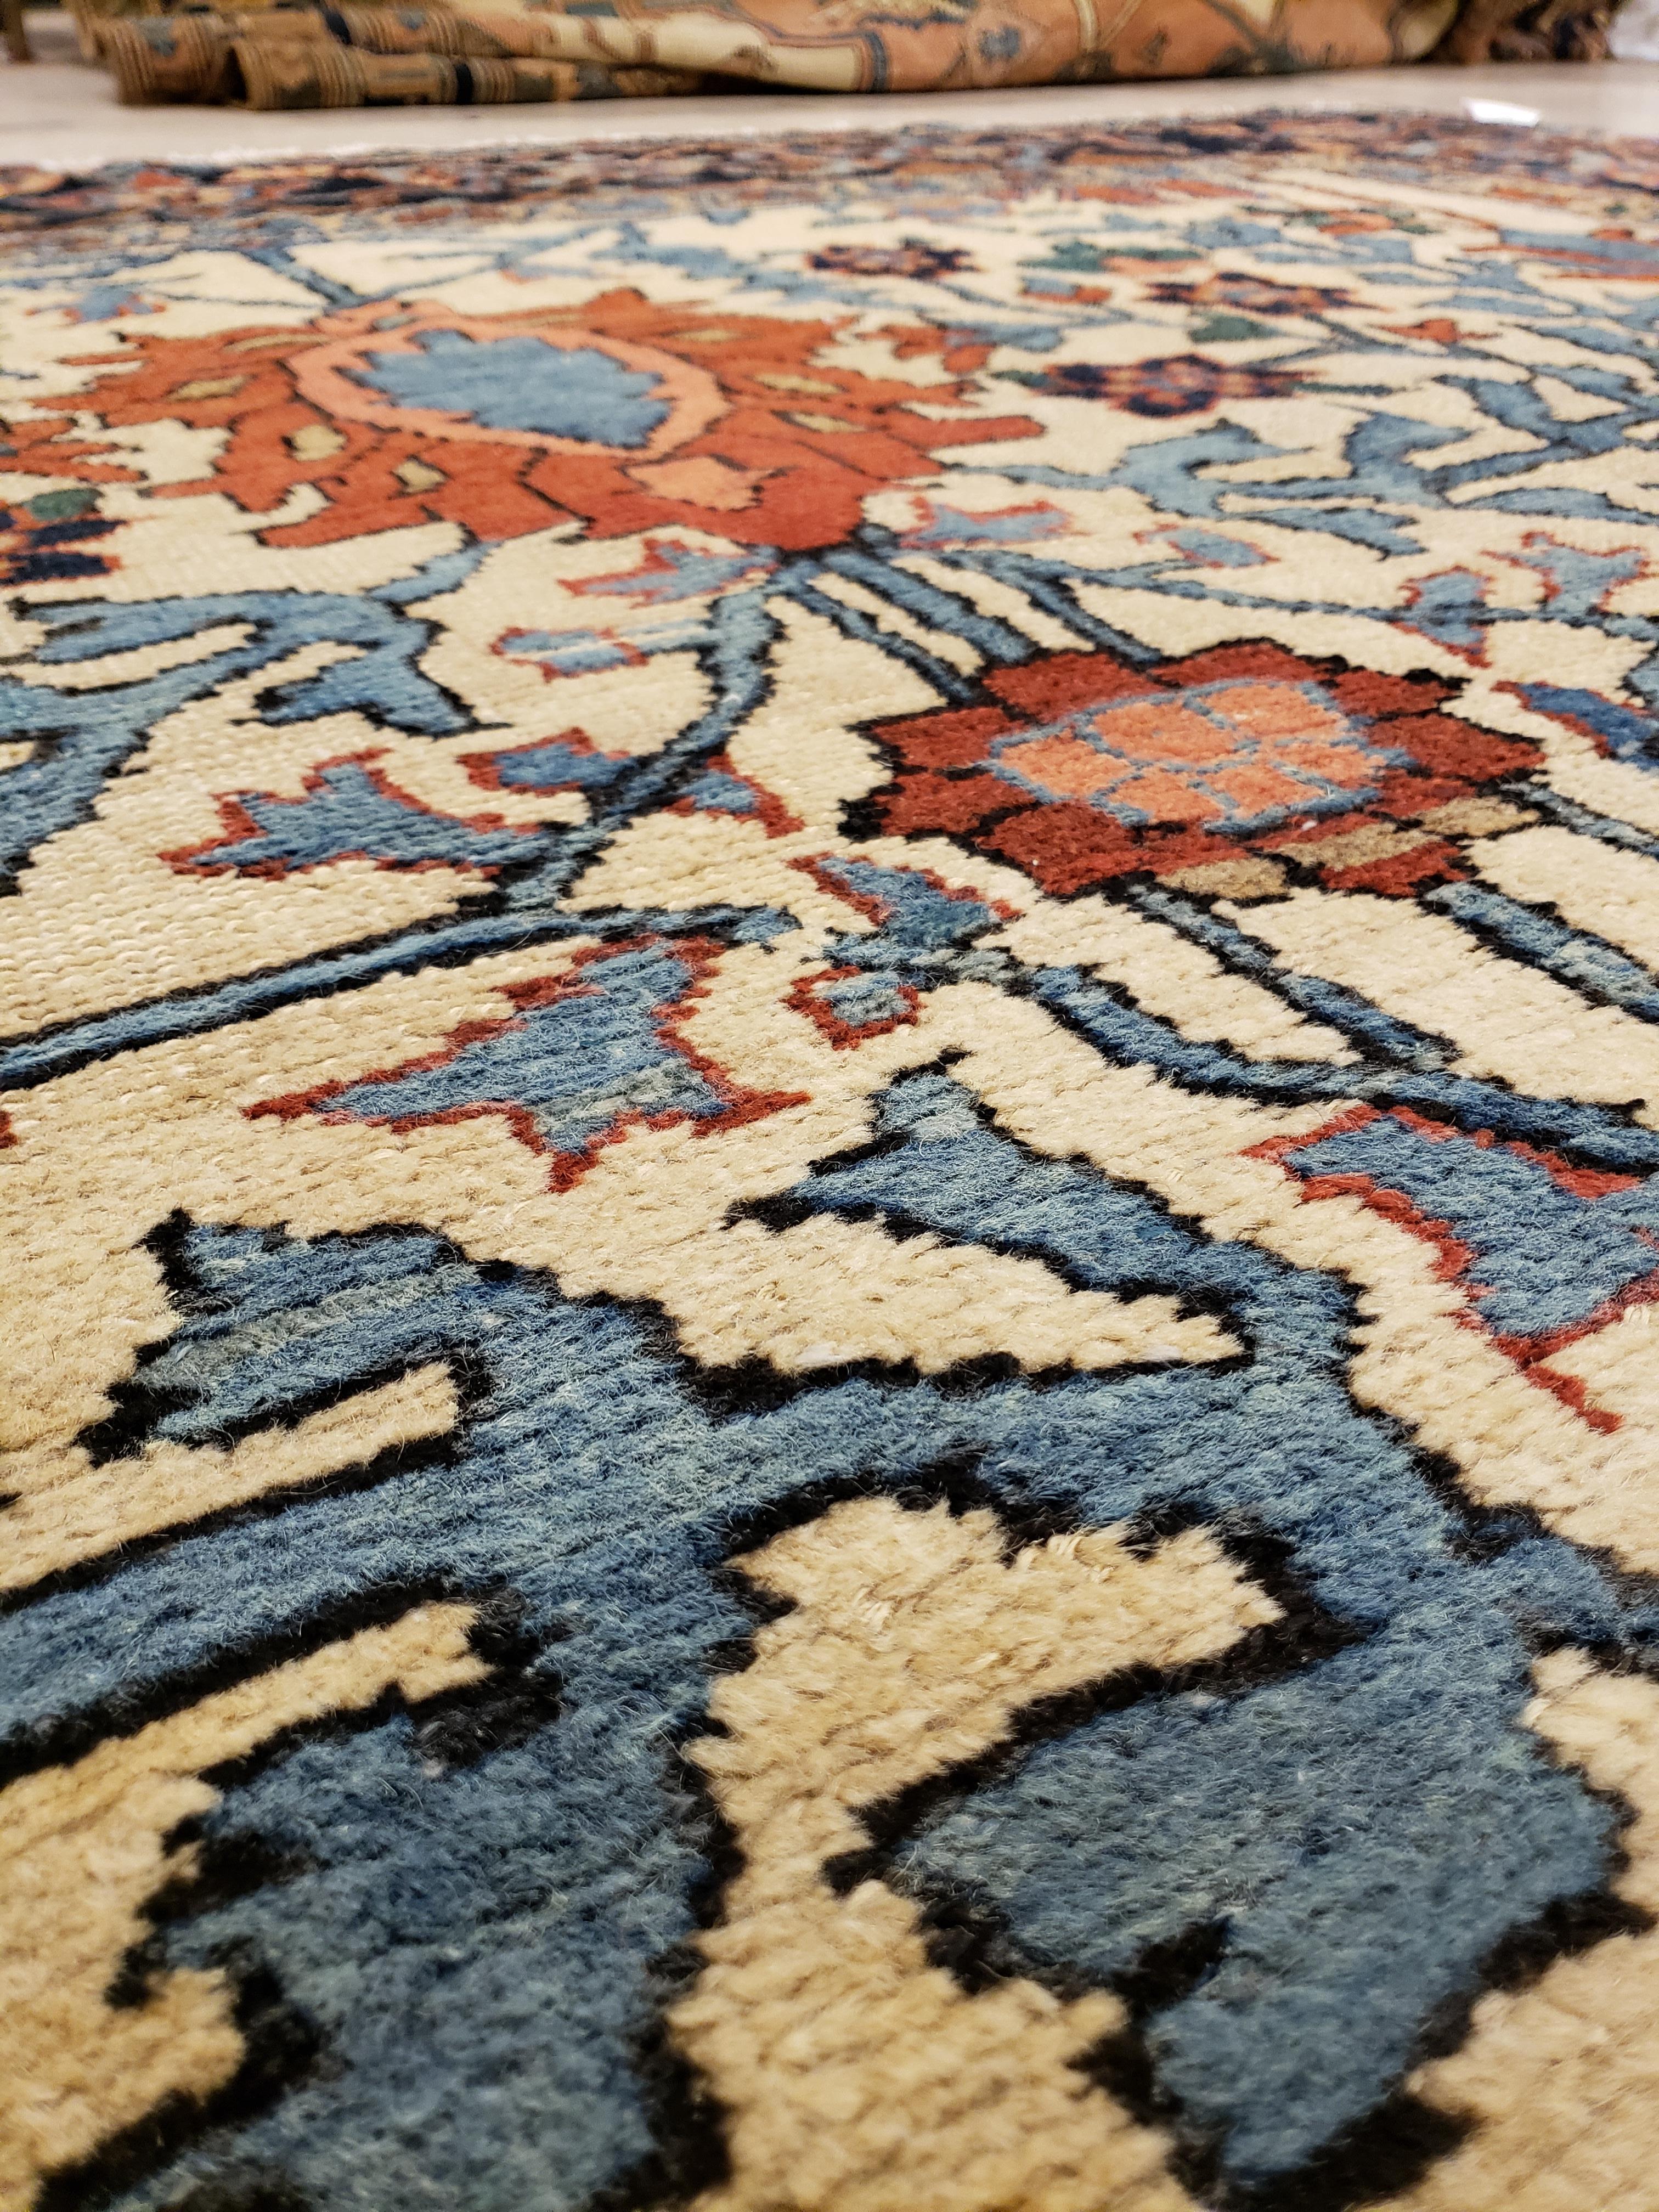 Antique Heriz Northwest Persian Runner, Handmade Rug, Navy Light Blue, Gold Rust In Excellent Condition For Sale In Port Washington, NY